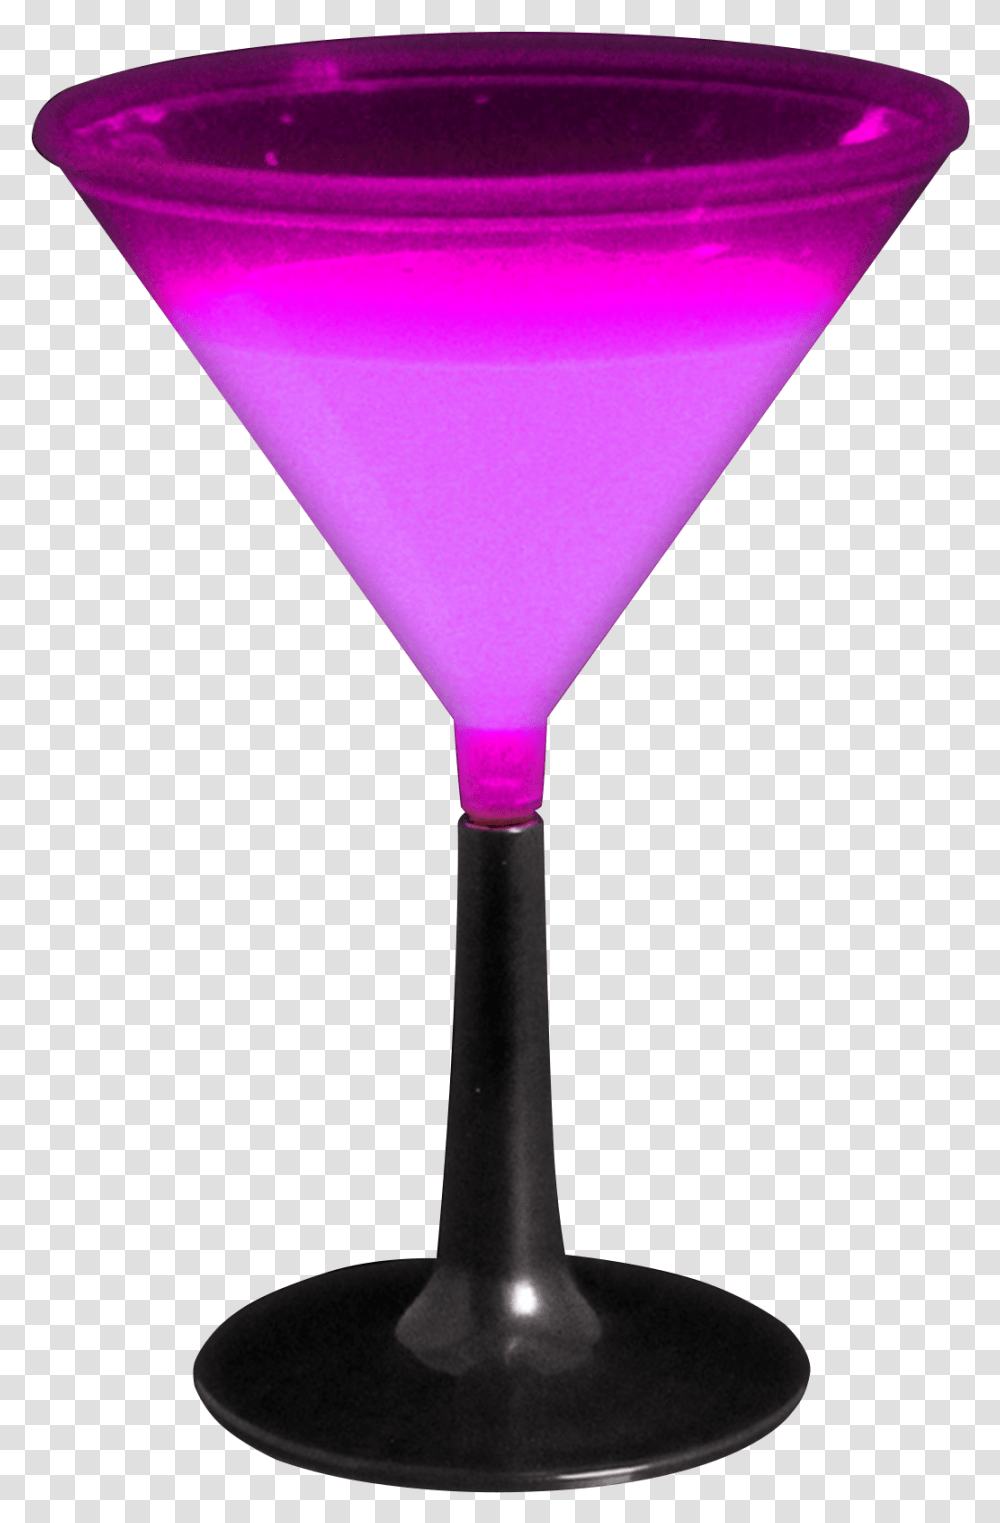 Pink Martini Glass Martini Glass, Lamp, Cocktail, Alcohol, Beverage Transparent Png